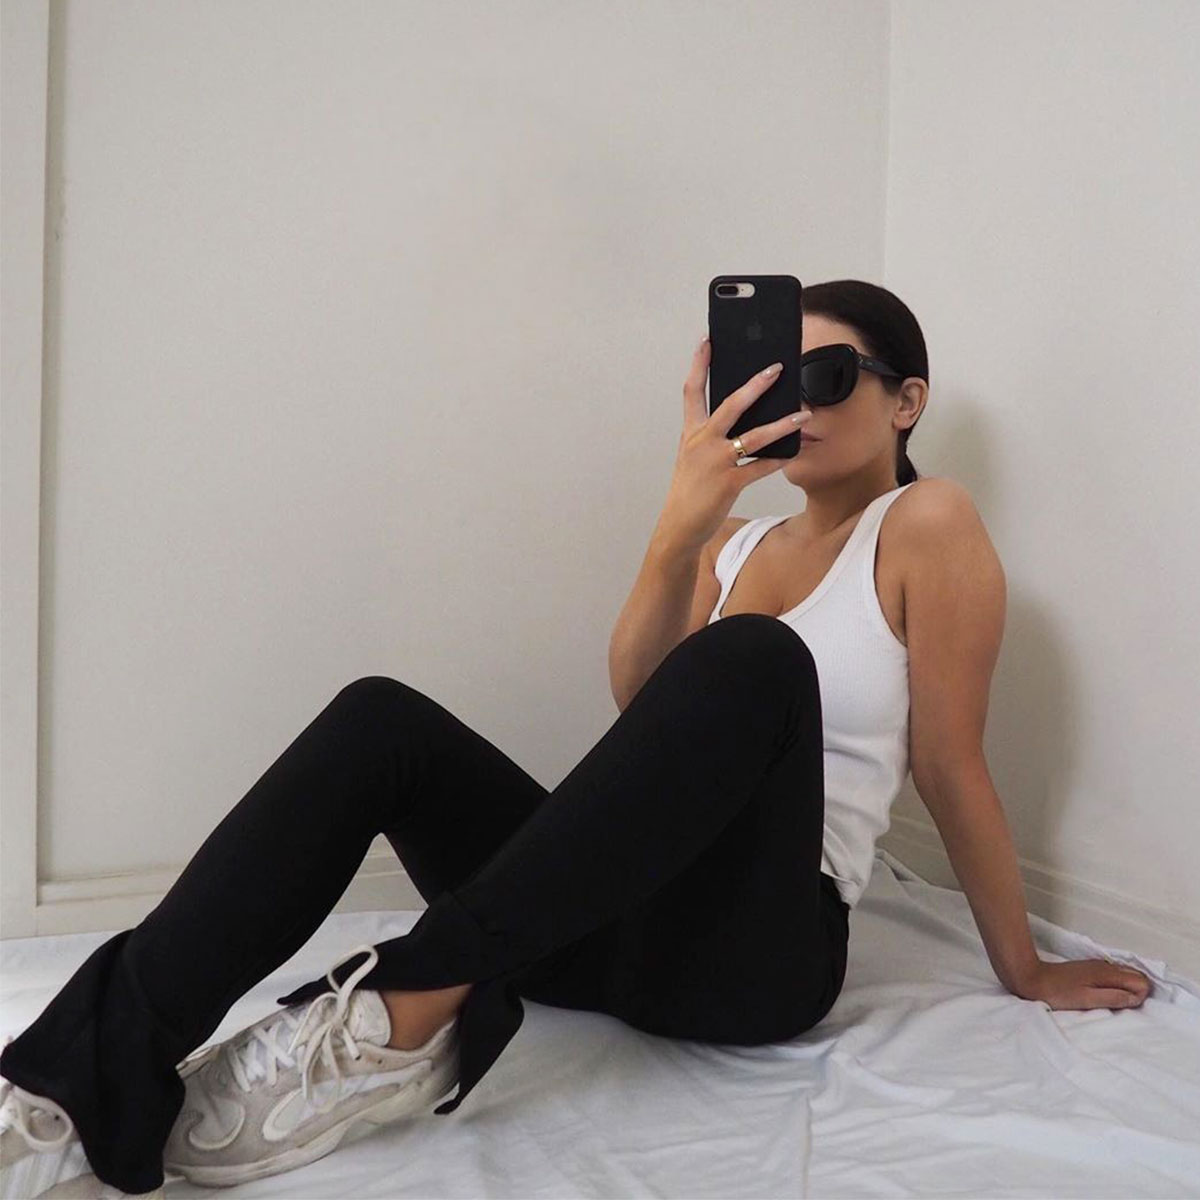 The Nontraditional Legging Trend That's Increasing in Popularity